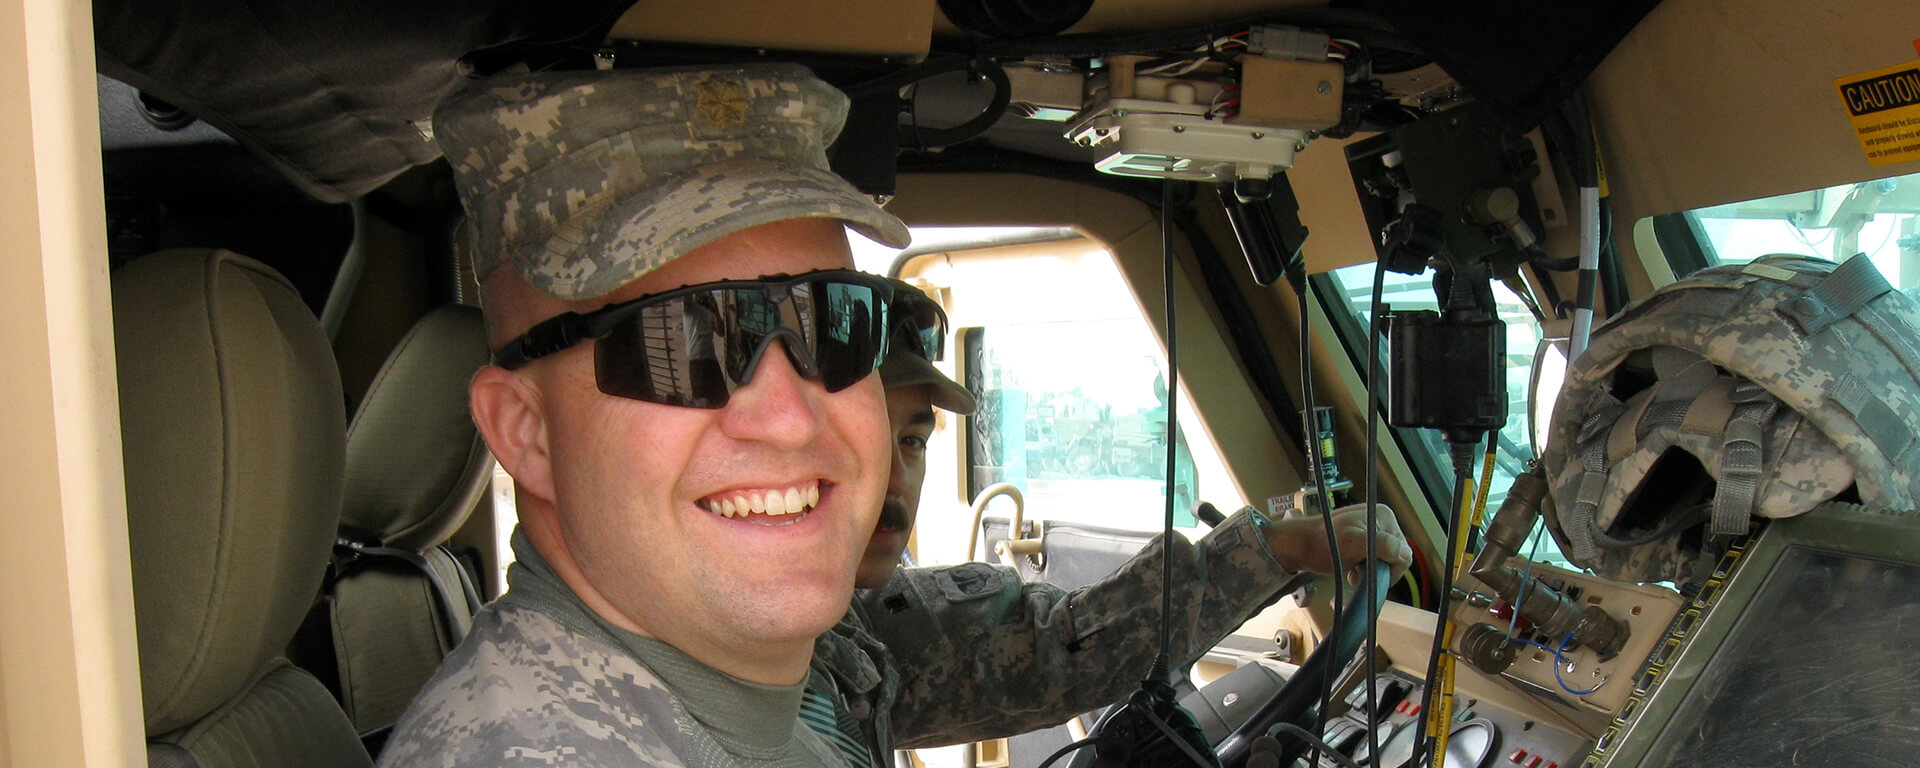 Chris, a Tech leader at Capital One, sits in a military vehicle in his digis while deployed in Afghanistan